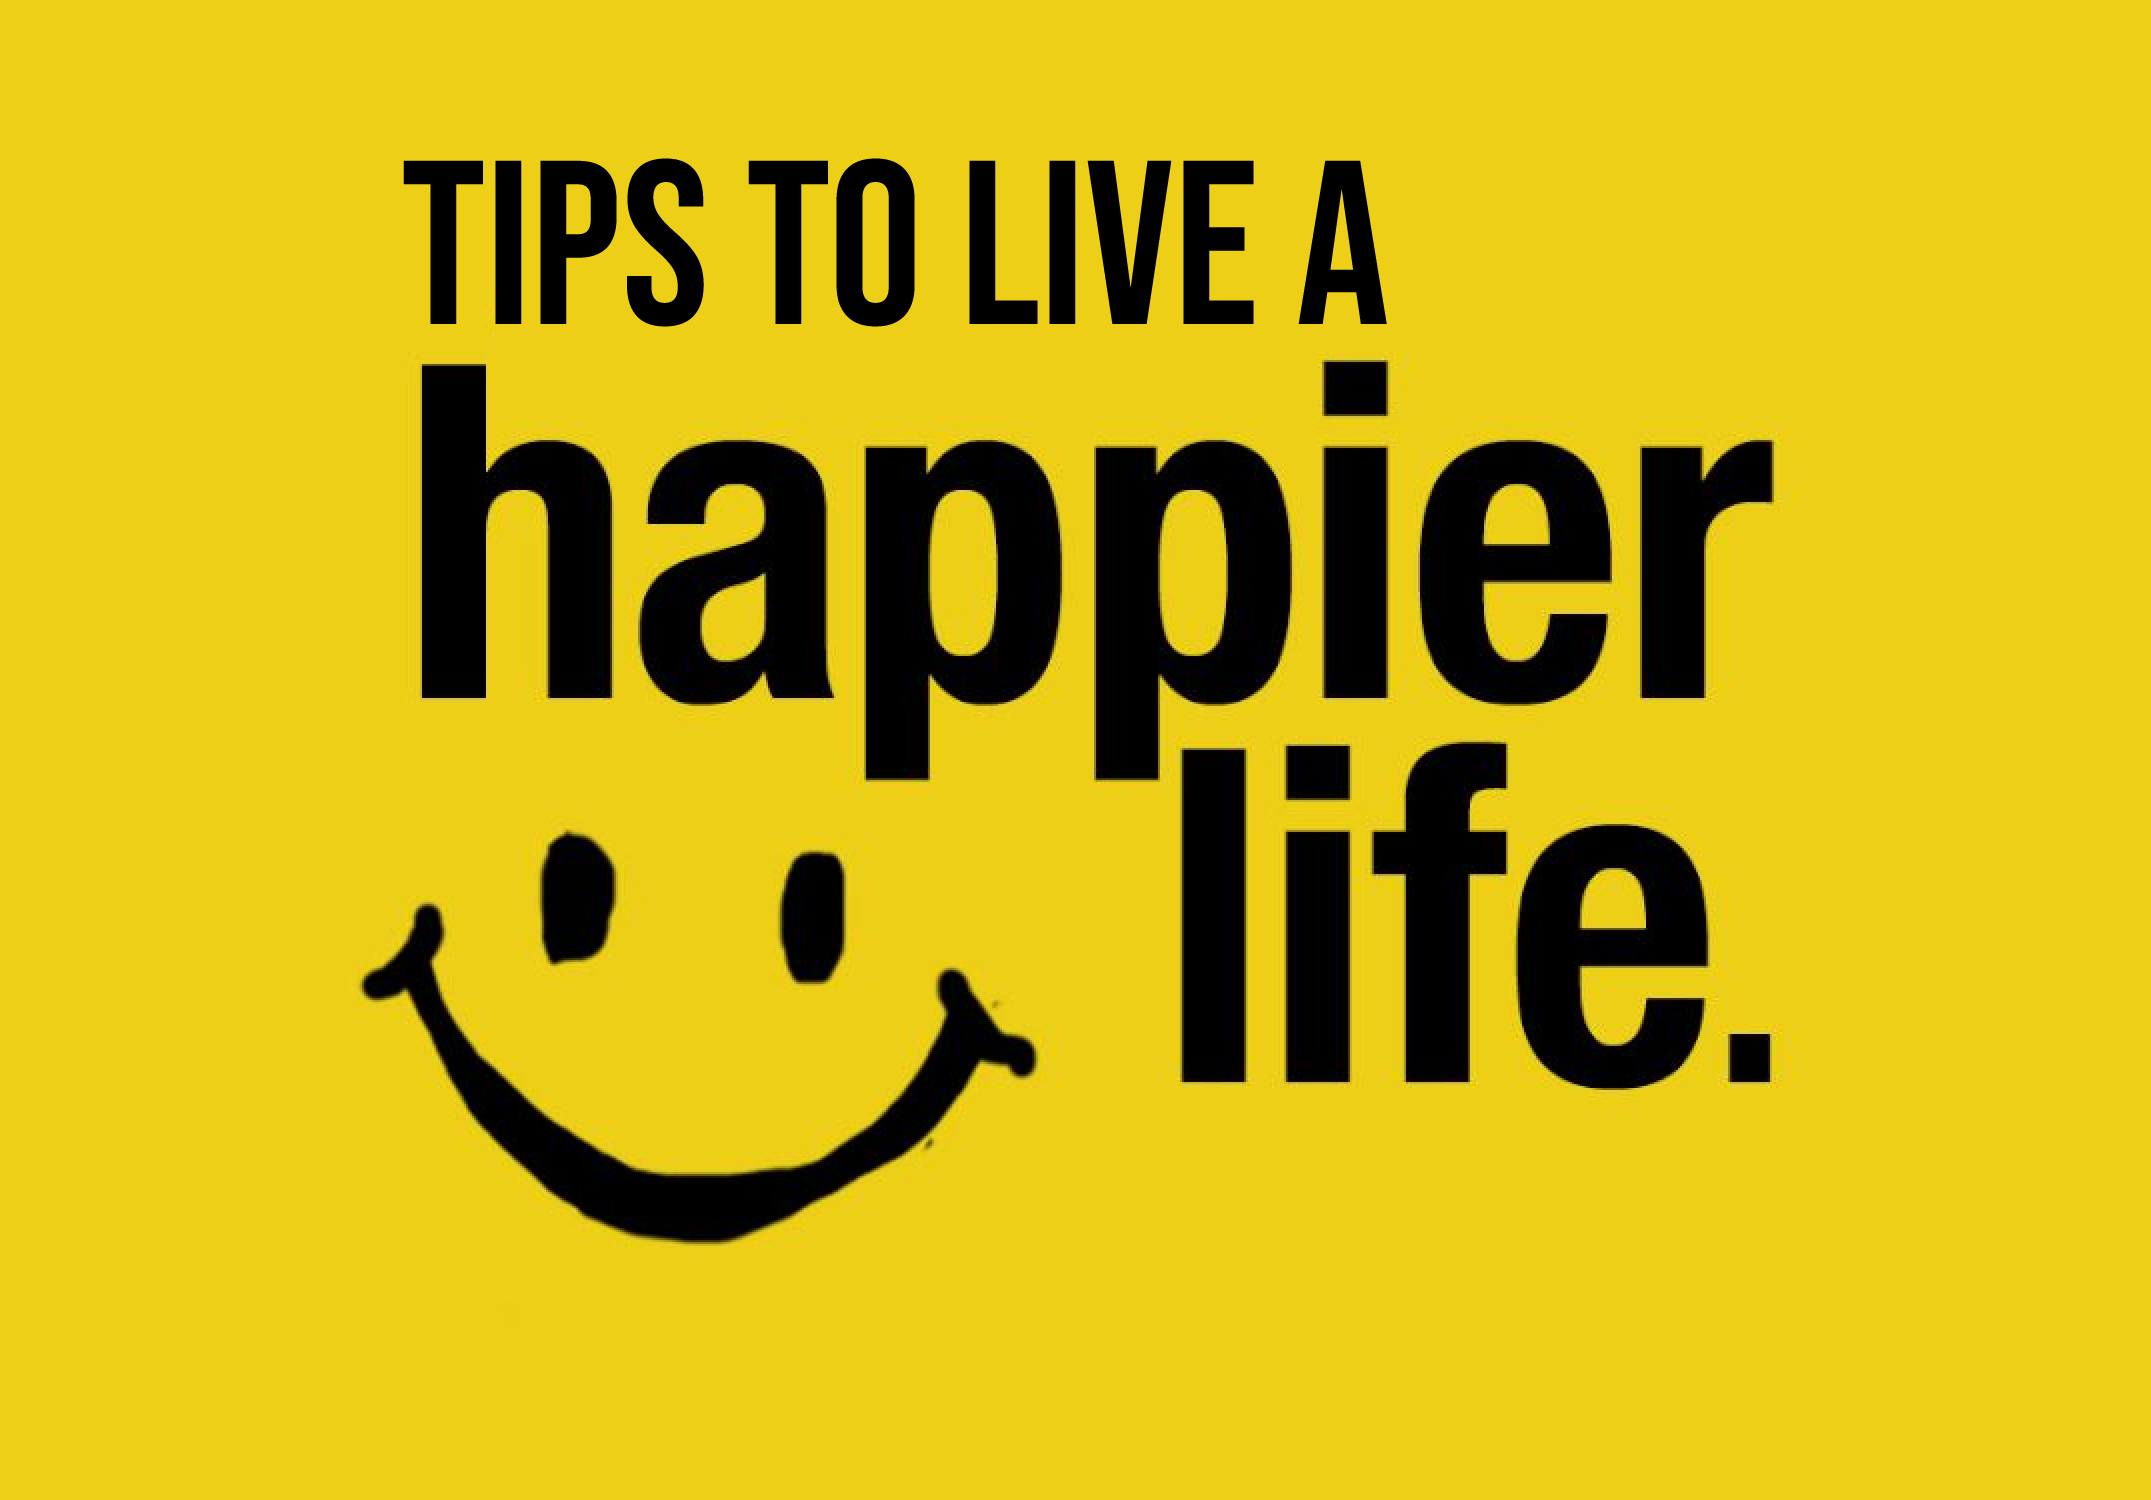 Tips to Live a Happier Life